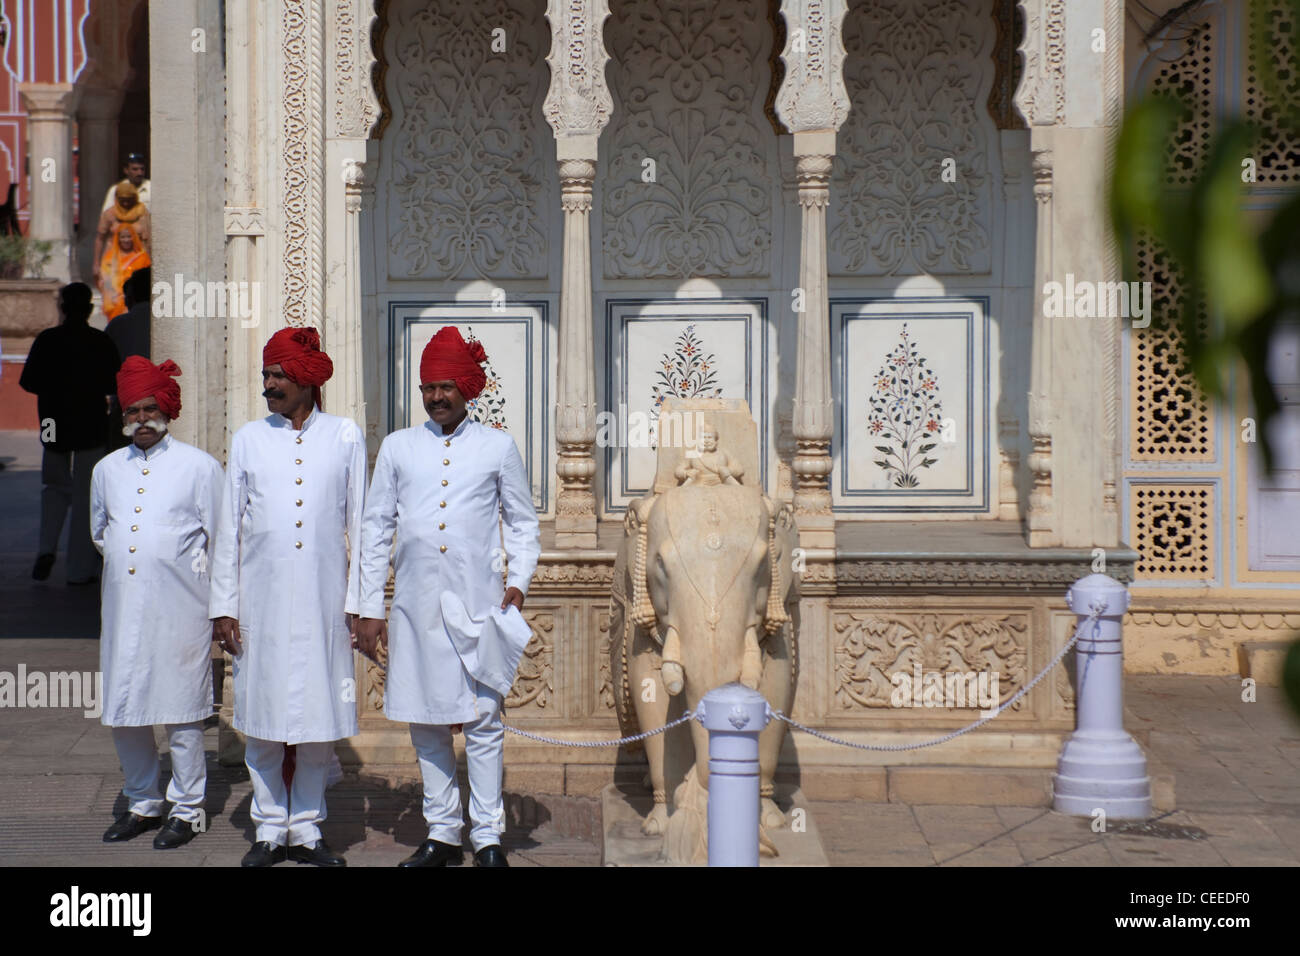 Guards in traditional dress an the entrance to the City Palace, Jaipur, Rajasthan, India Stock Photo